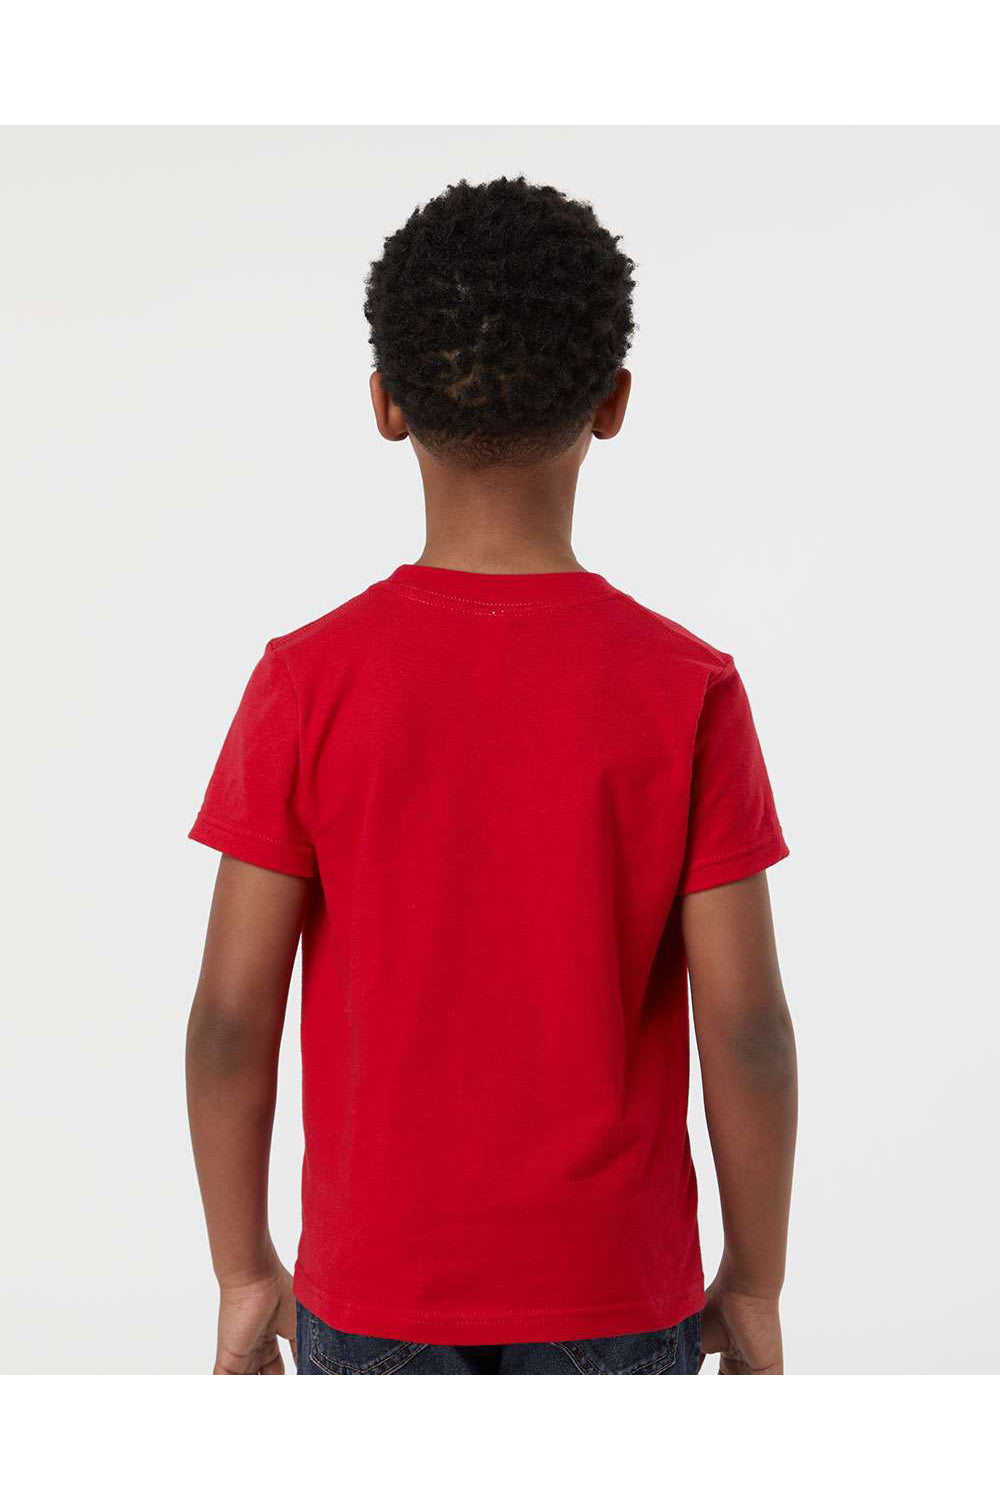 Tultex 235 Youth Fine Jersey Short Sleeve Crewneck T-Shirt Red Model Back